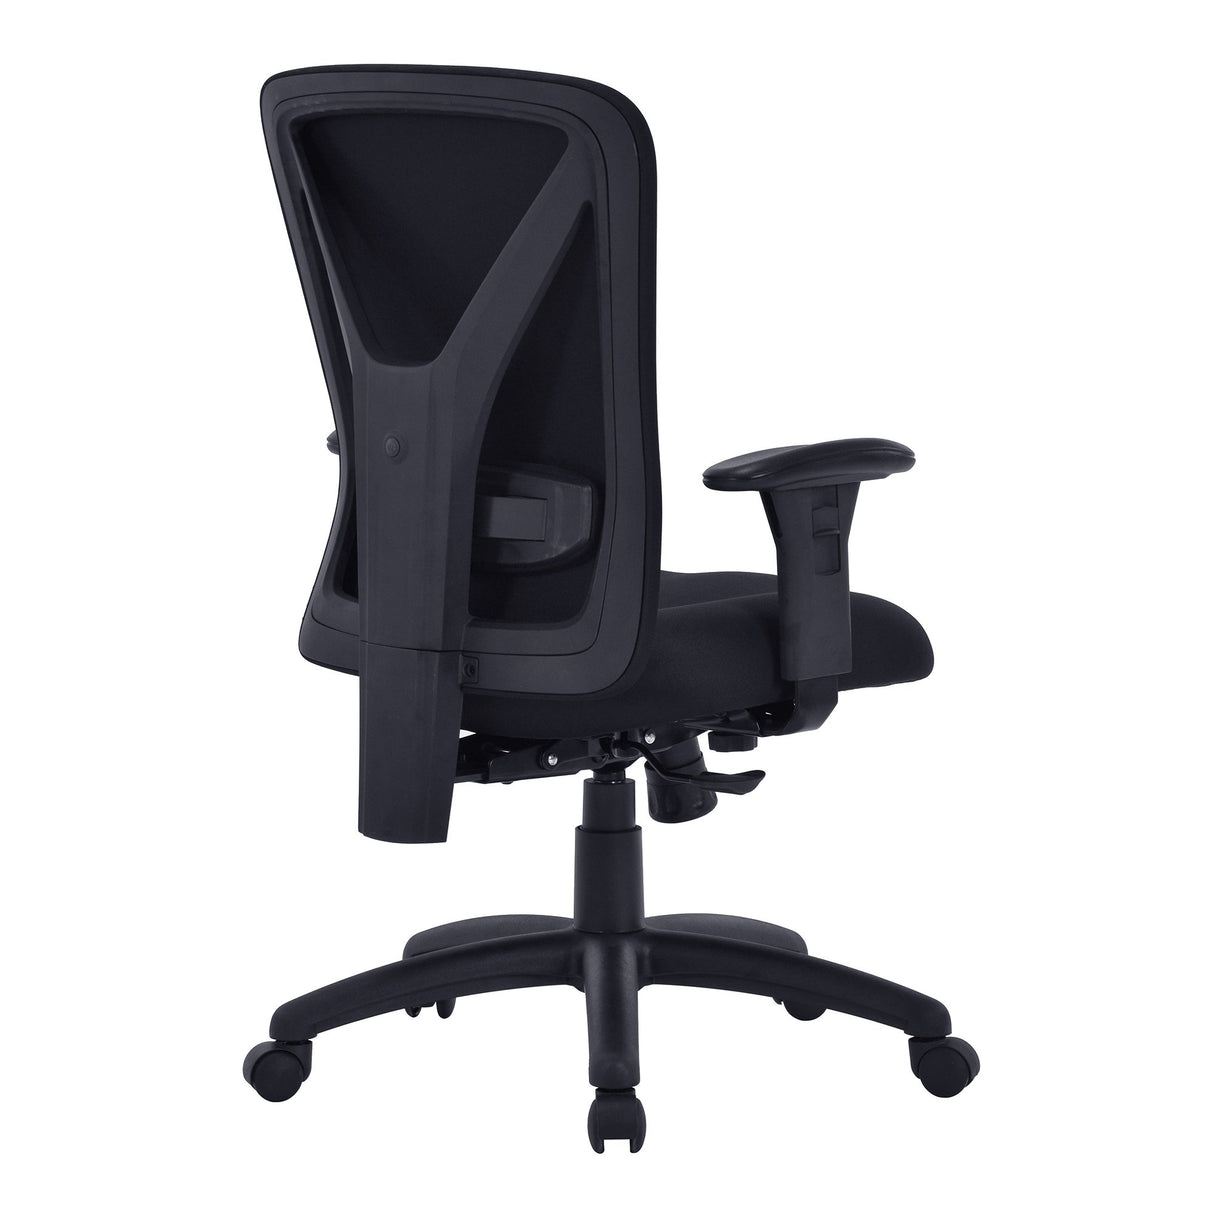 Nautilus Designs Fortis Bariatric Task/Manager Chair with Integrated Lumbar Support - Black